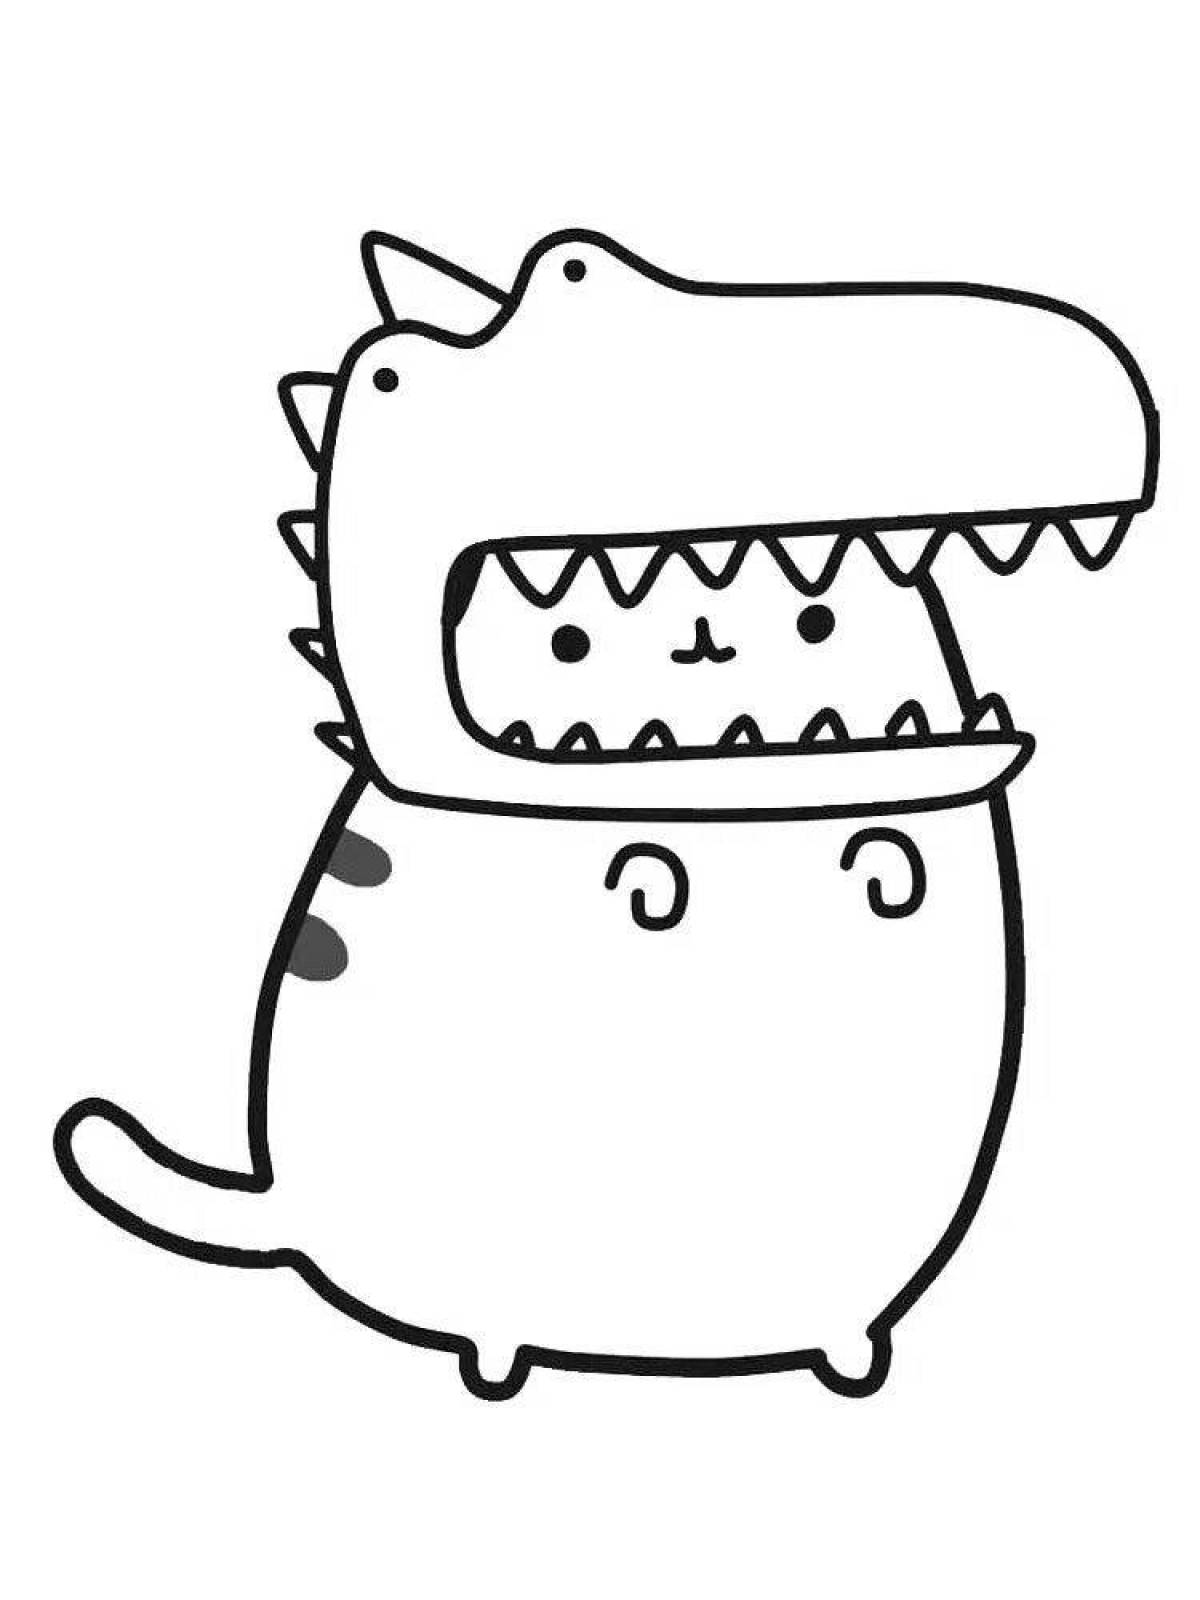 Colouring alluring pusheen